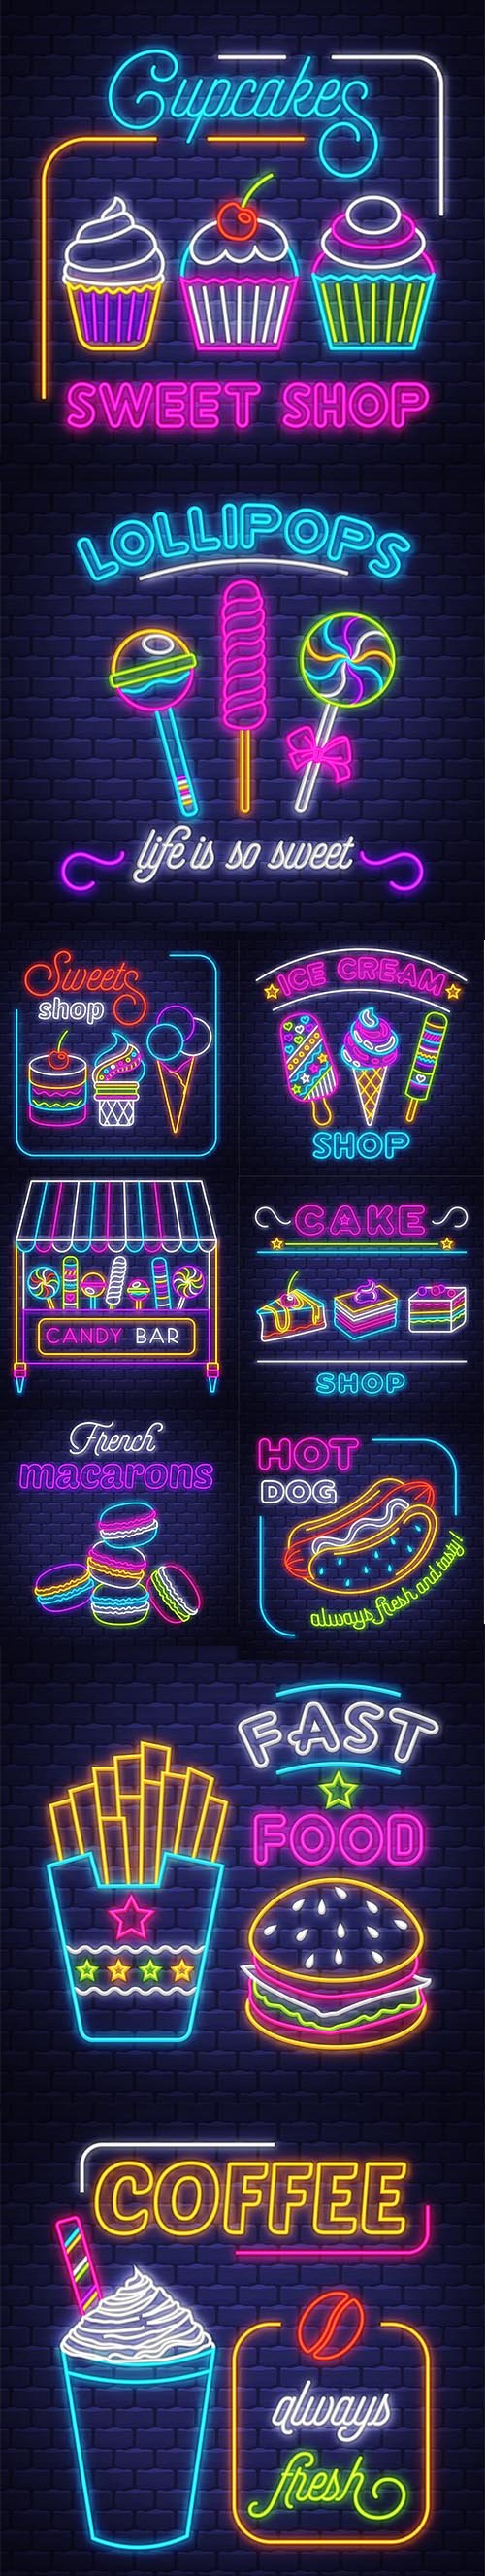 Sweets neon sign vector